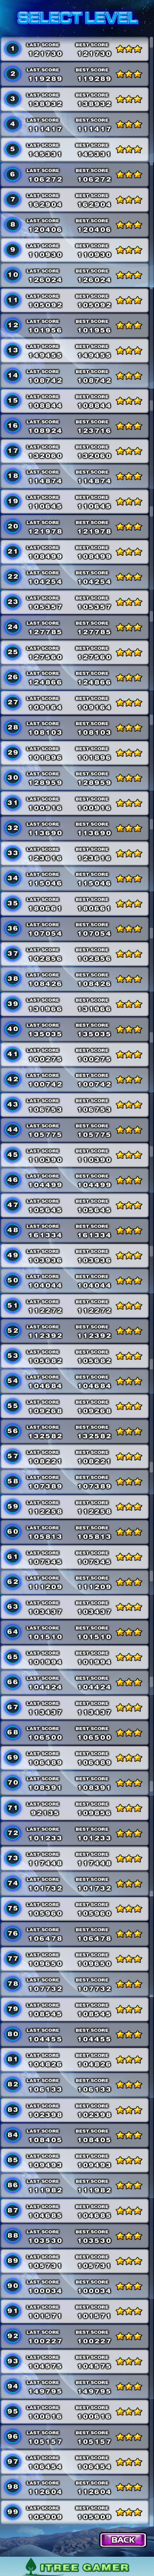 Jewels Star - World 1 - High scores.png